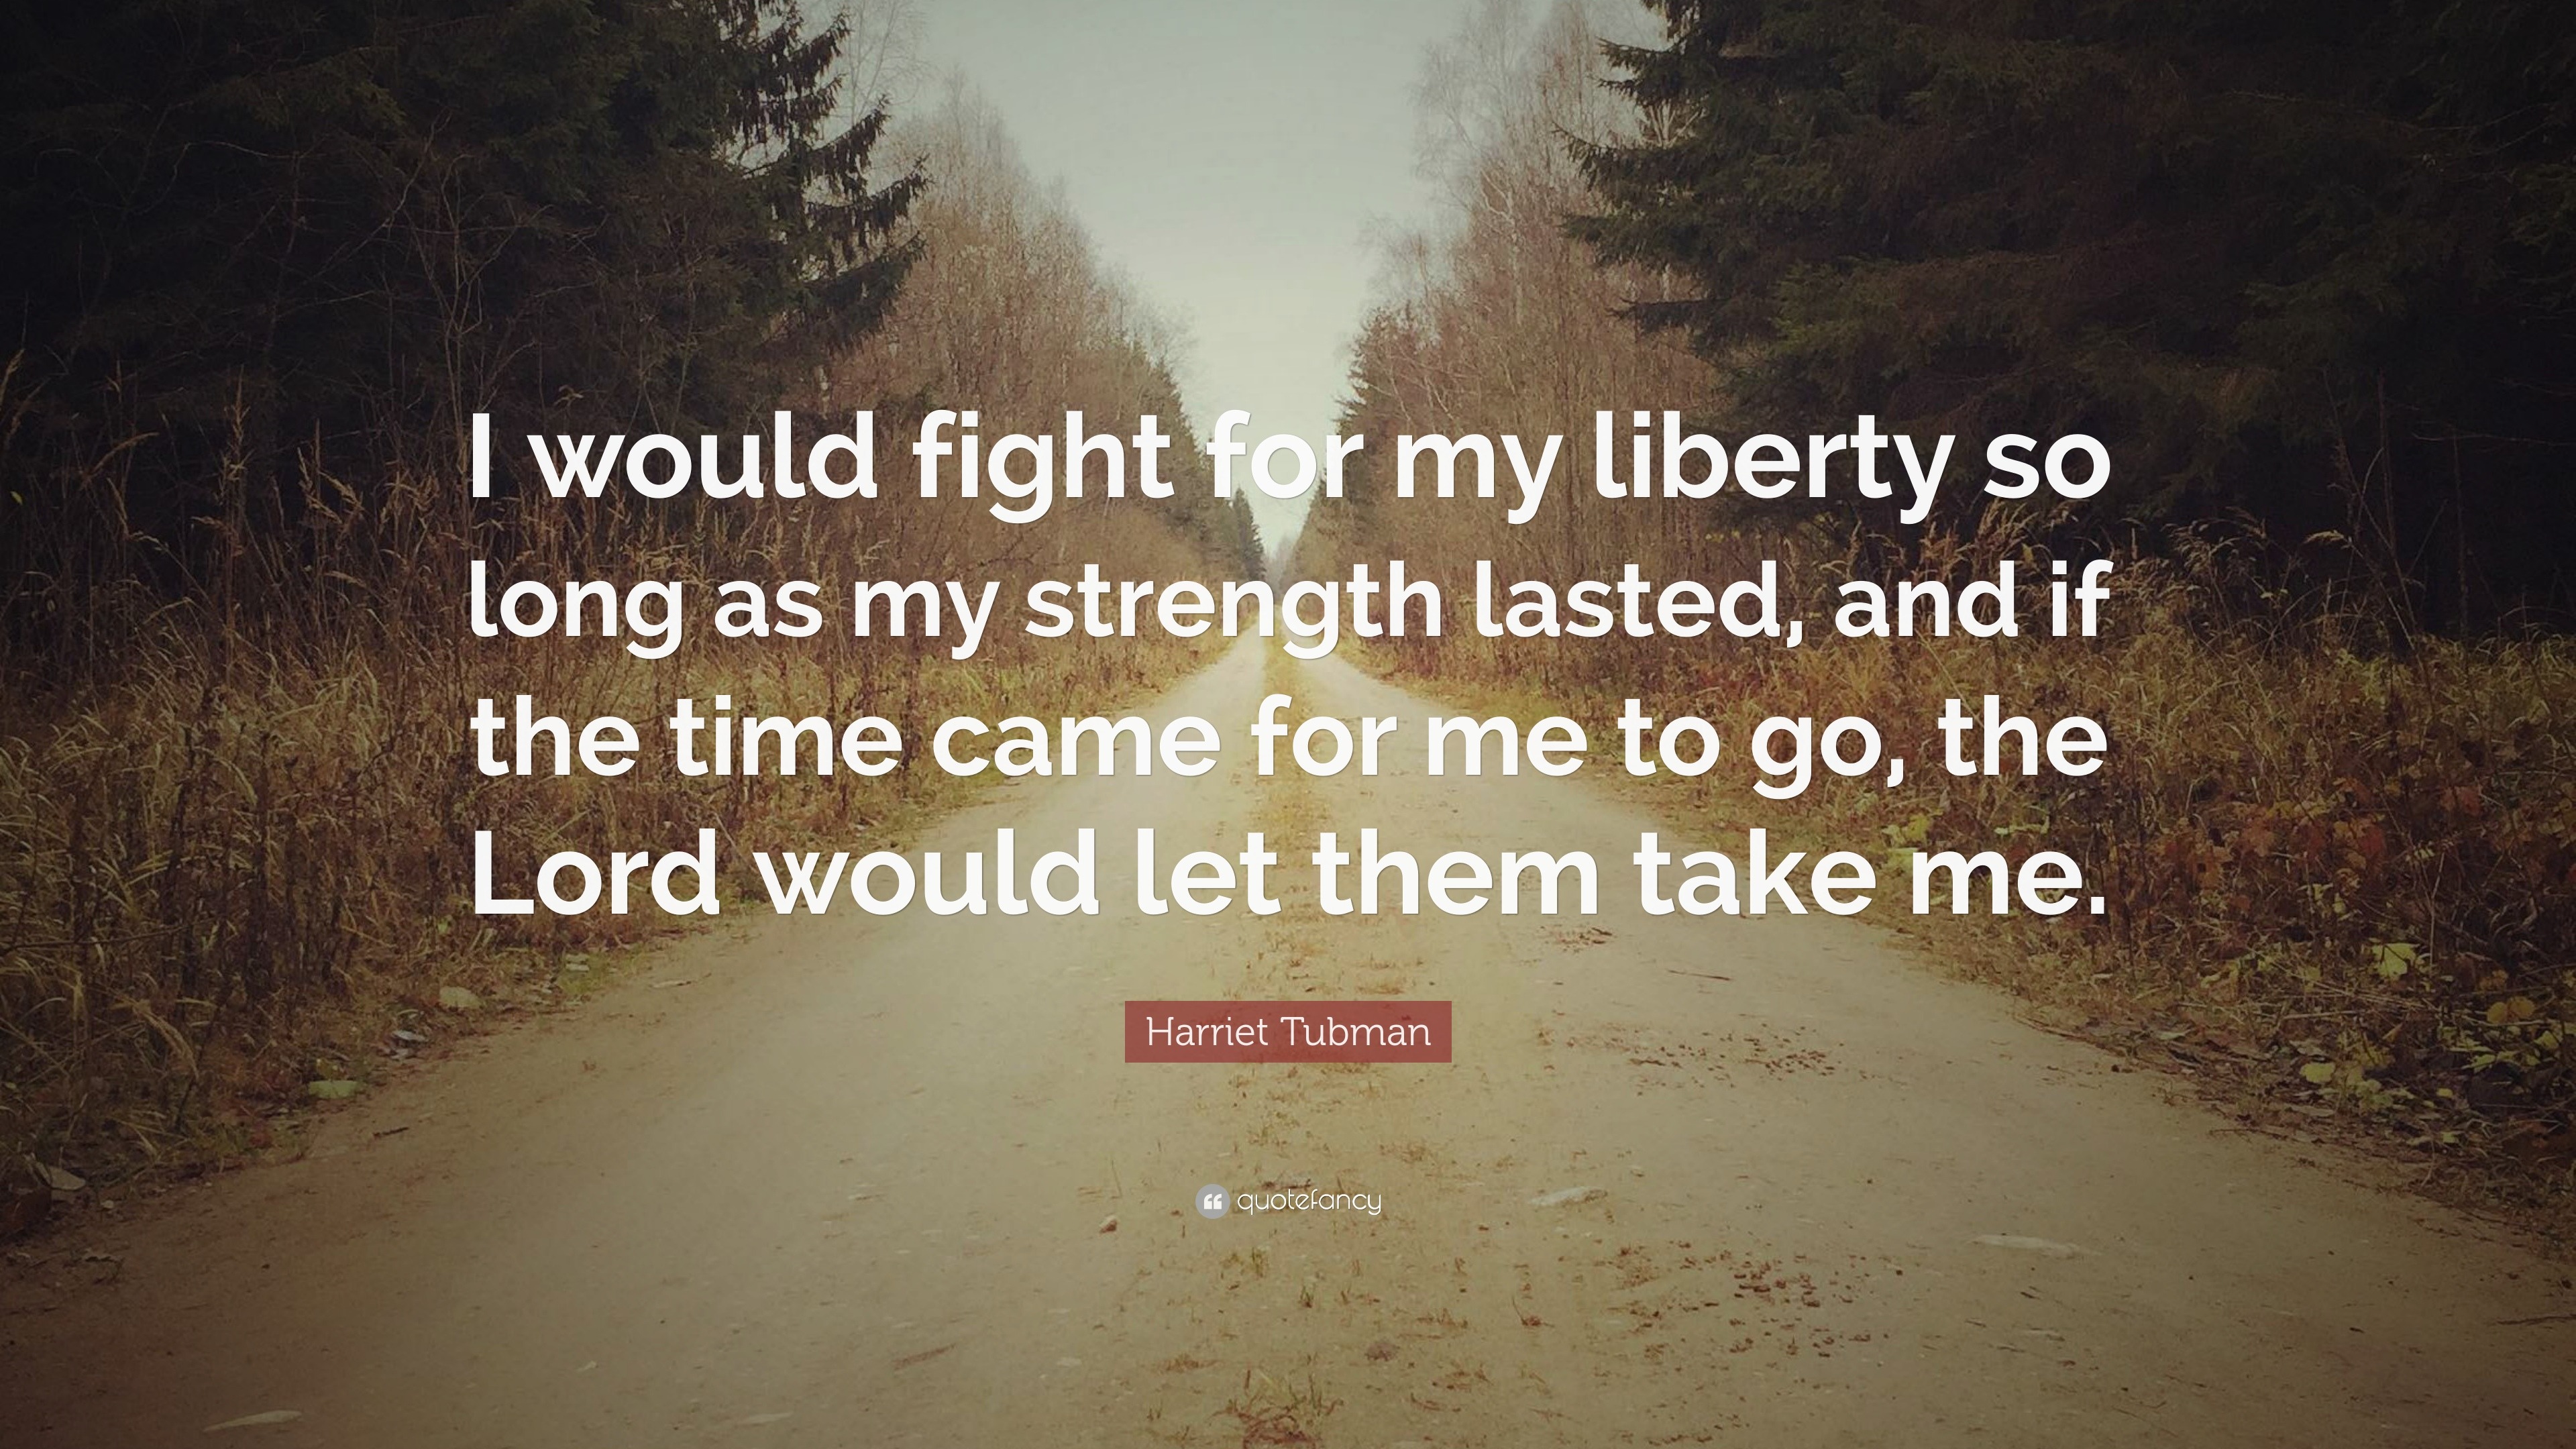 Harriet Tubman Quote: “I would fight for my liberty so long as my